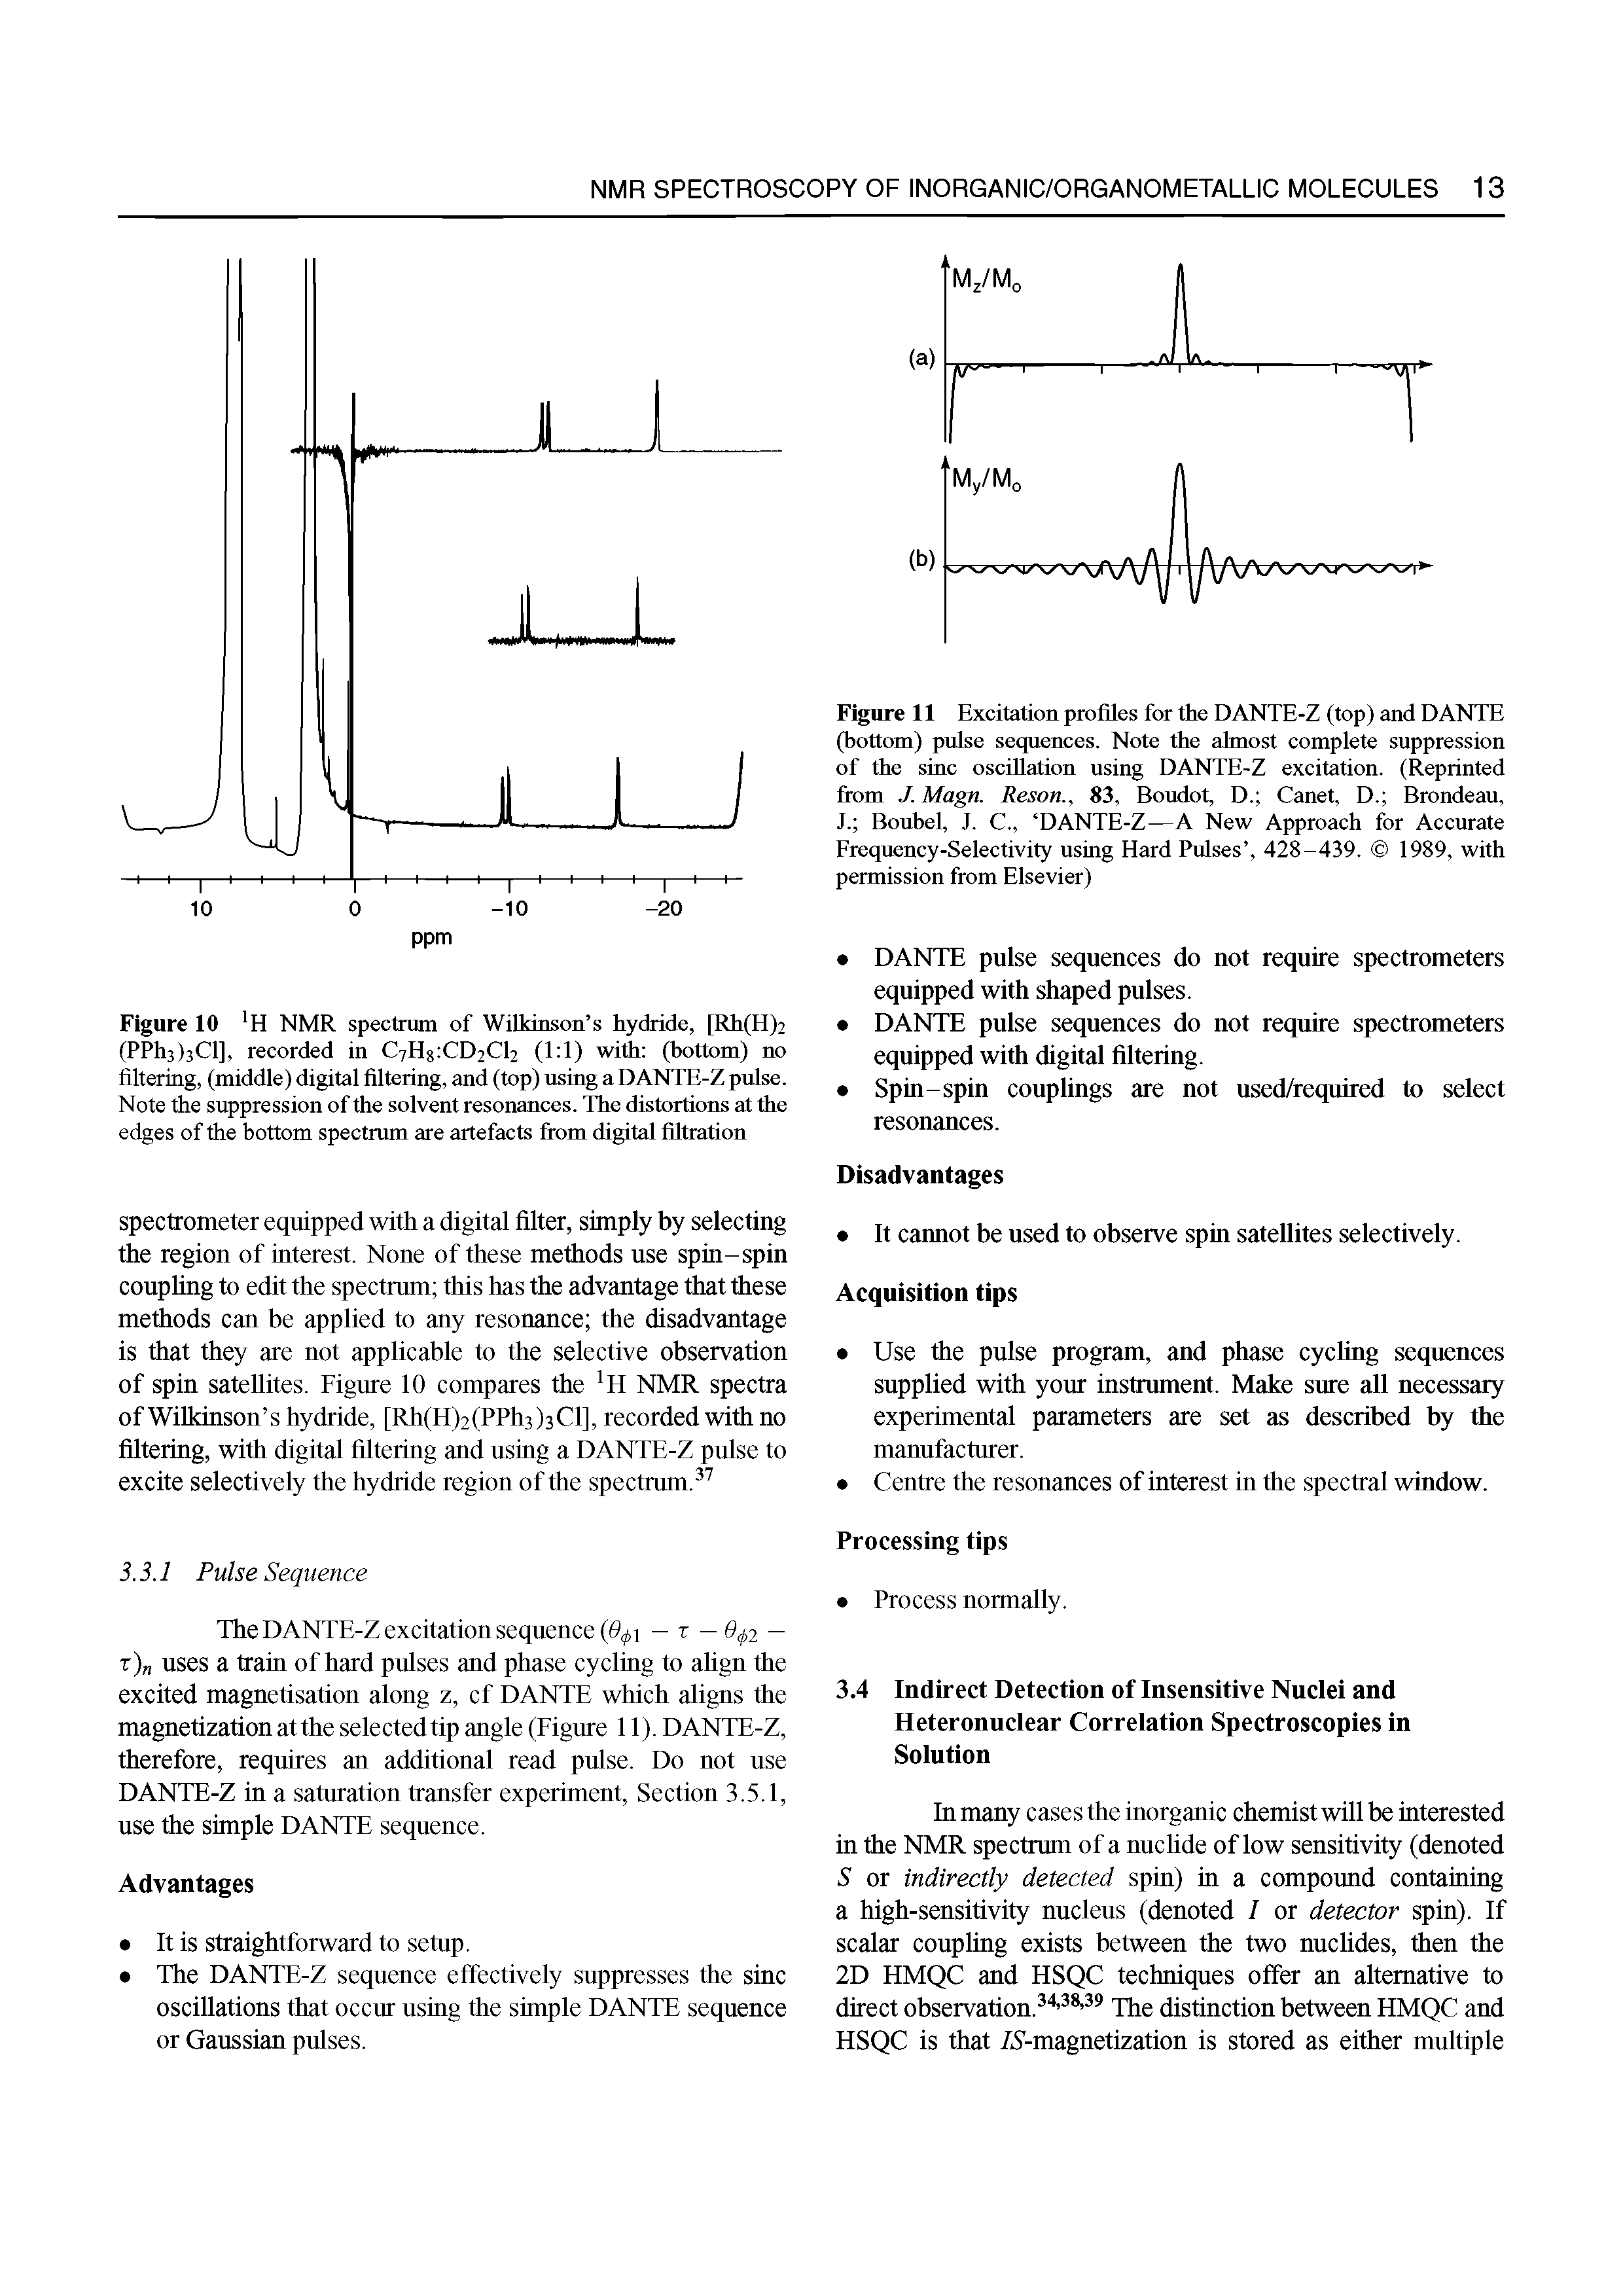 Figure 11 Excitation profiles for the DANTE-Z (top) and DANTE (bottom) pnlse seqnences. Note the almost complete suppression of the sine oscillation using DANTE-Z excitation. (Reprinted from J. Magn. Reson., 83, Boudot, D. Canet, D. Brondeau, J. Bouhel, J. C., DANTE-Z—A New Approach for Accurate Frequency-Selectivity using Hard Pulses , 428-439. 1989, with permission from Elsevier)...